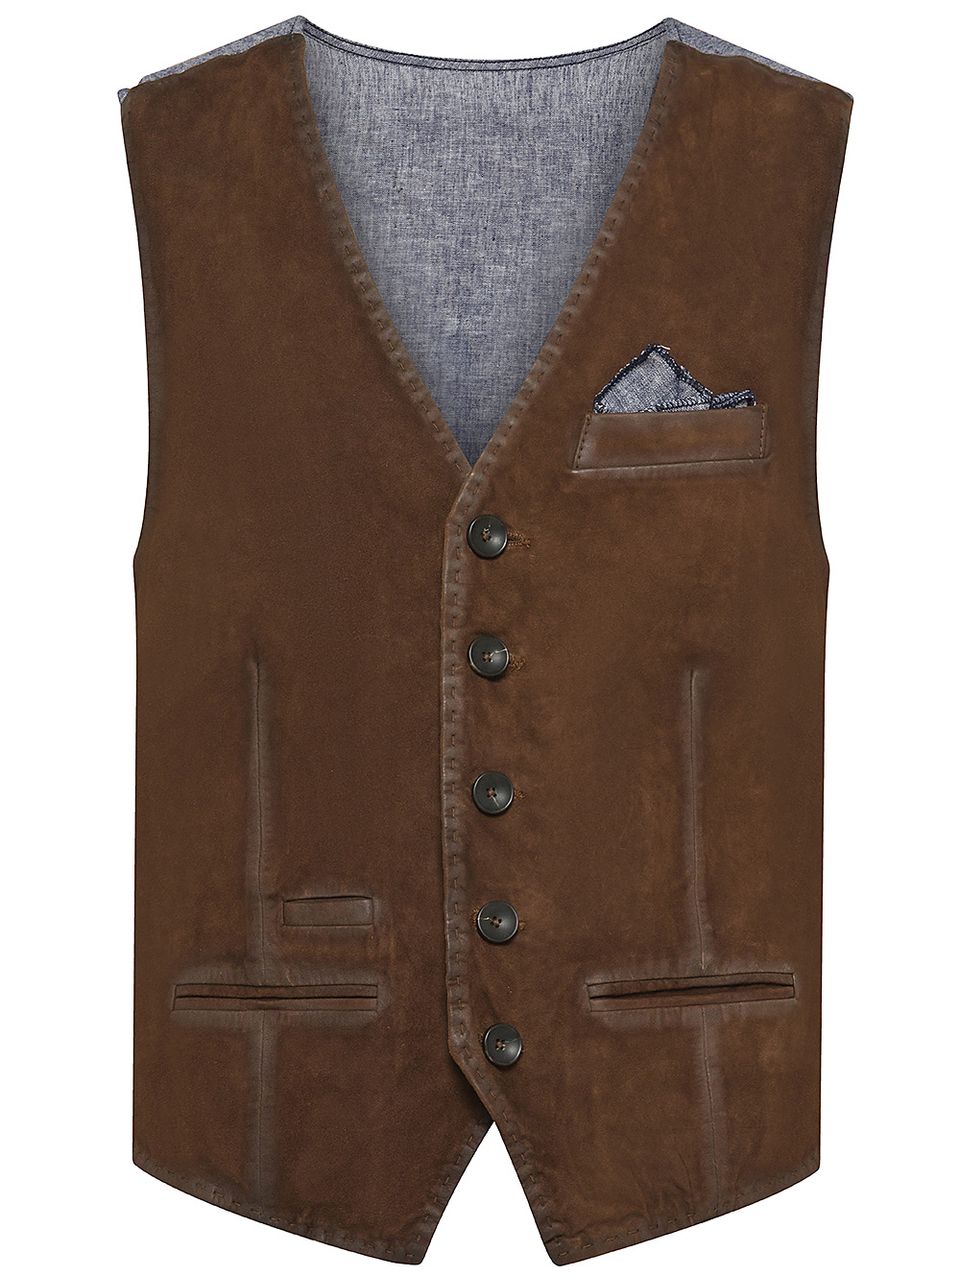 Suede and cotton vest with pocket square